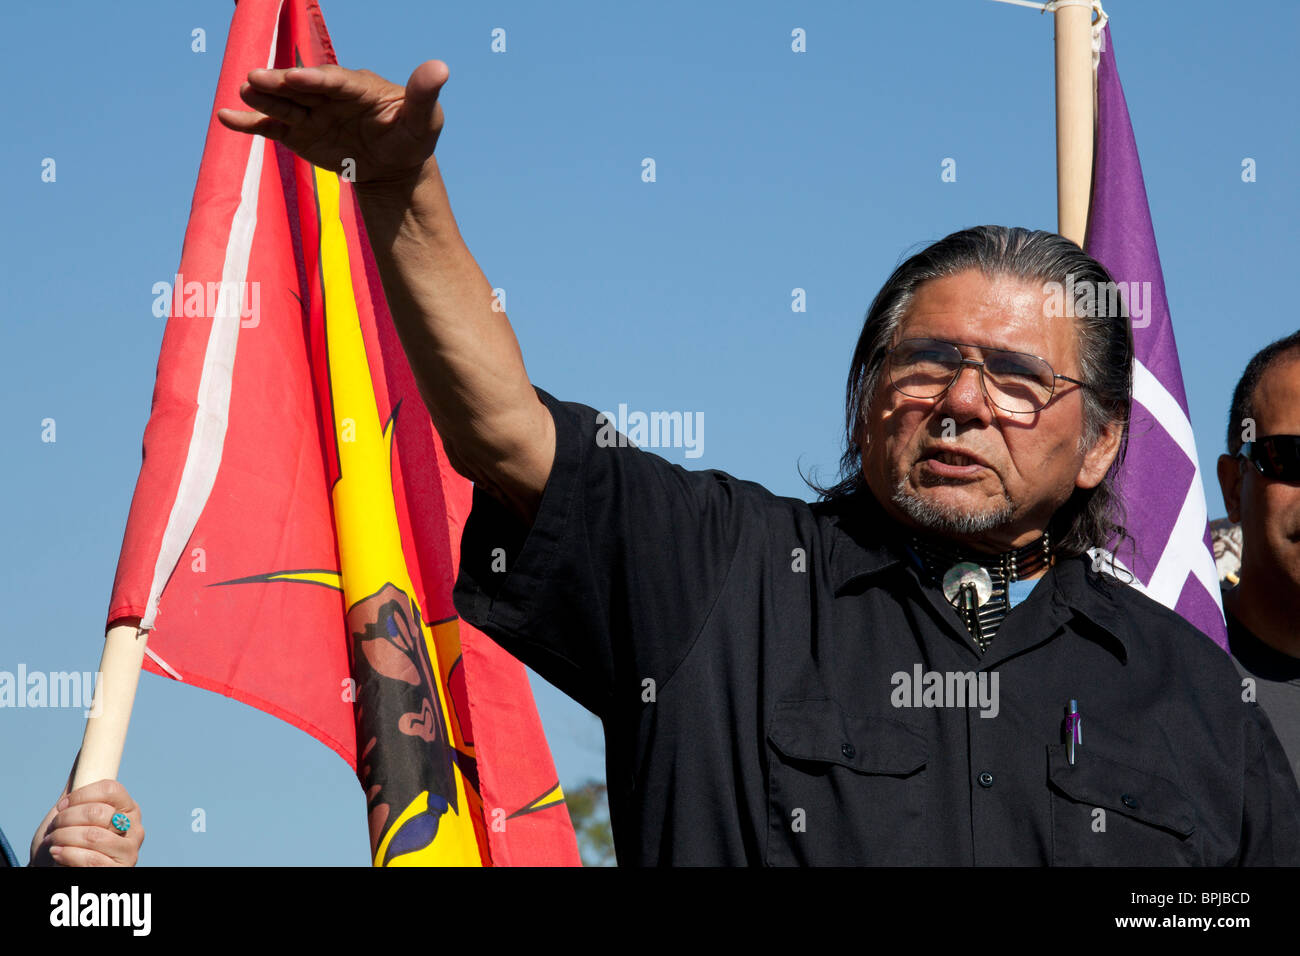 american indian movement